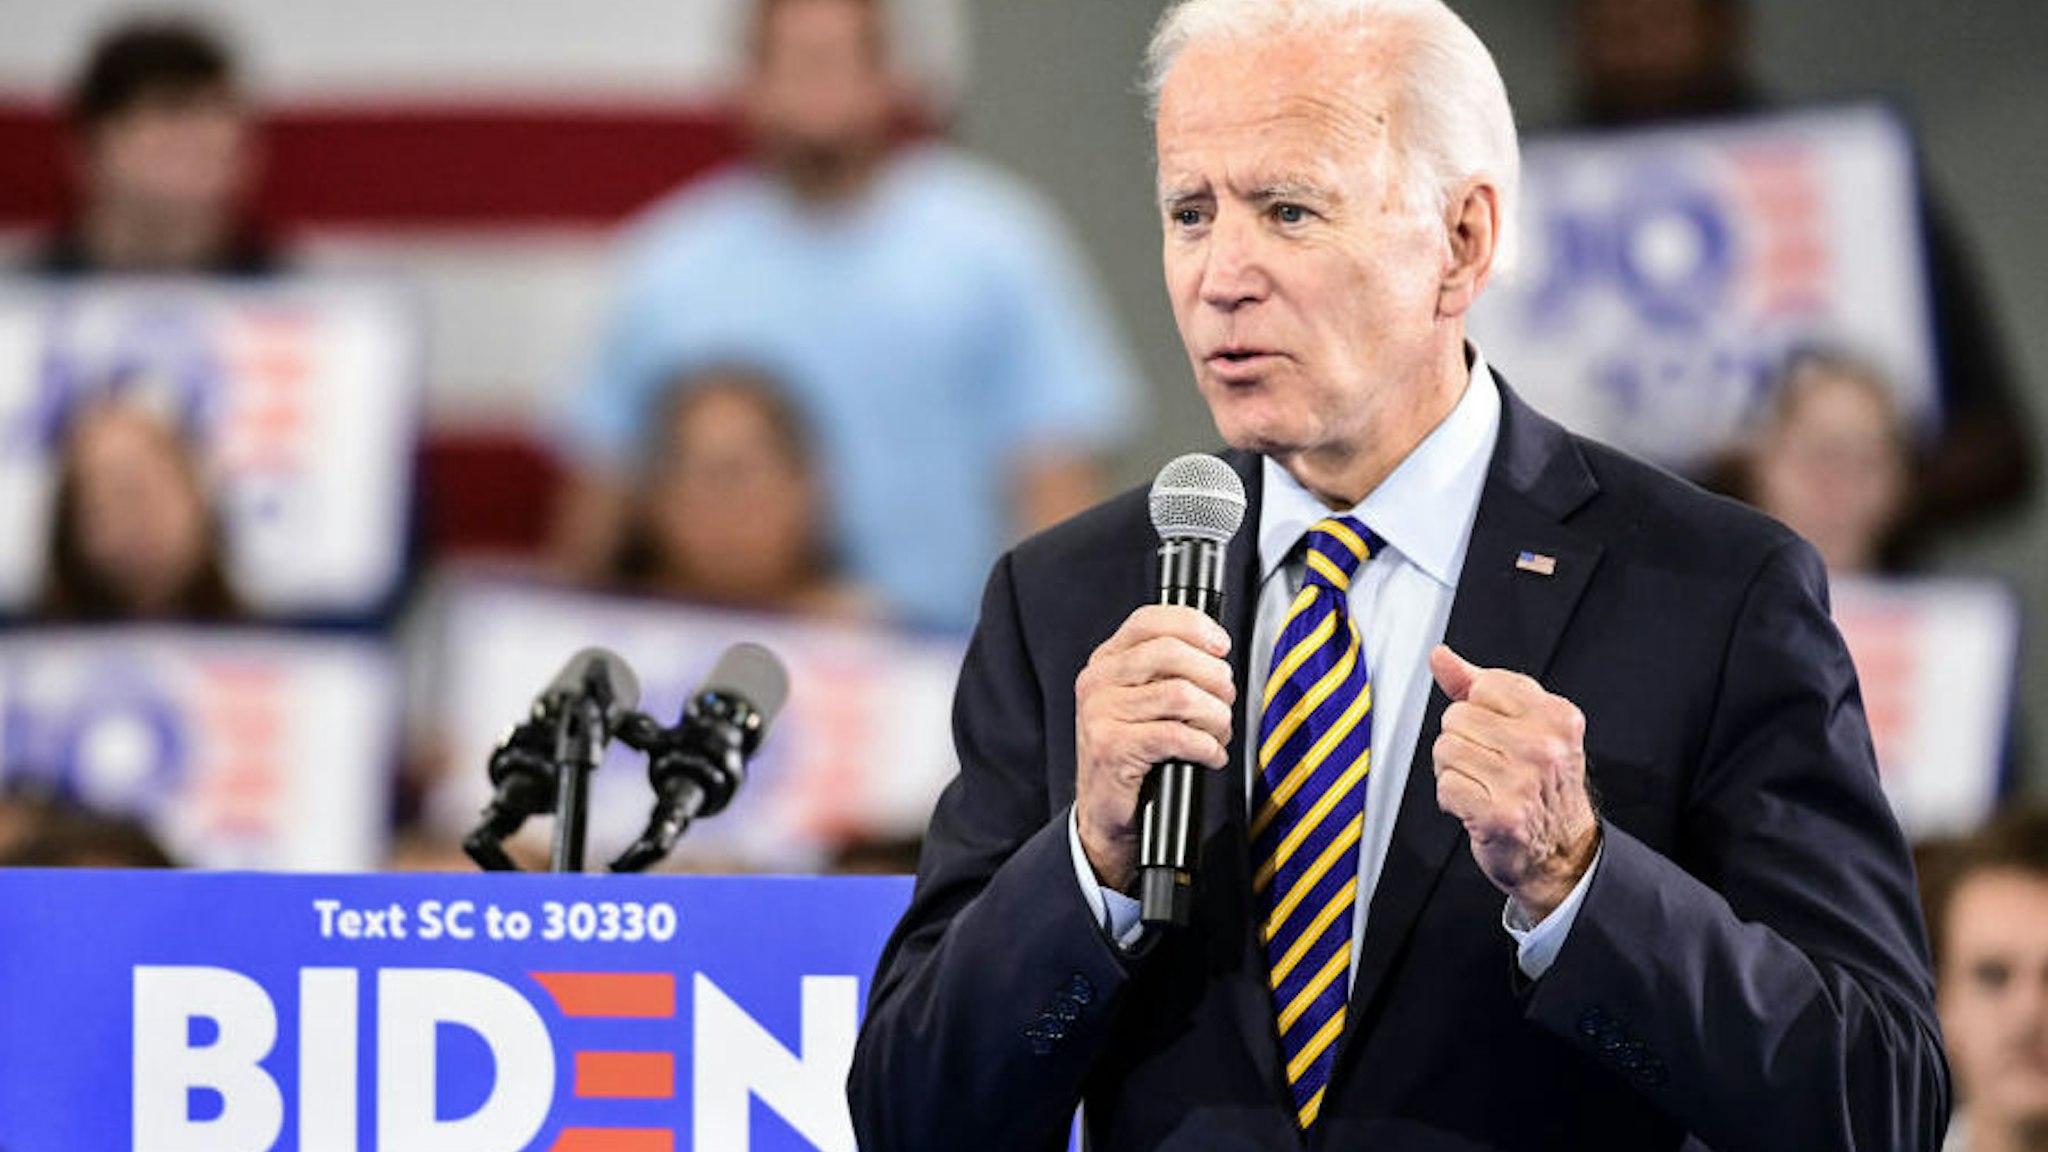 GREENWOOD, SC - NOVEMBER 21: Democratic presidential candidate, former vice President Joe Biden speaks to the audience during a town hall on November 21, 2019 in Greenwood, South Carolina. Polls show Biden with a commanding lead in the early primary state.